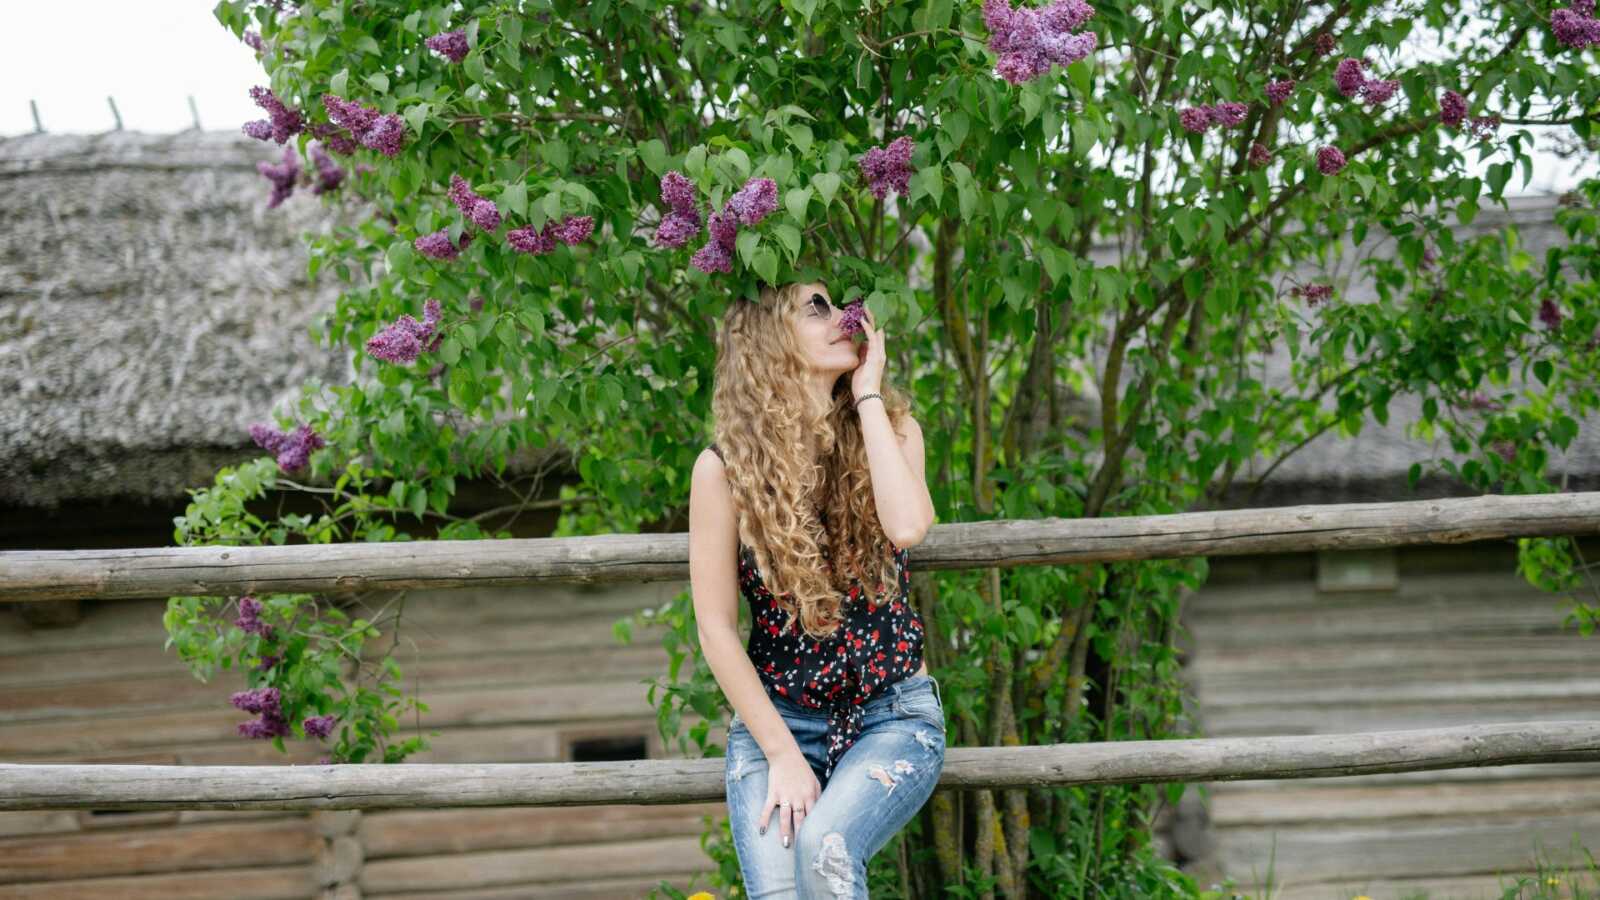 a woman sitting on a fence smelling a purple flower on a tree behind her